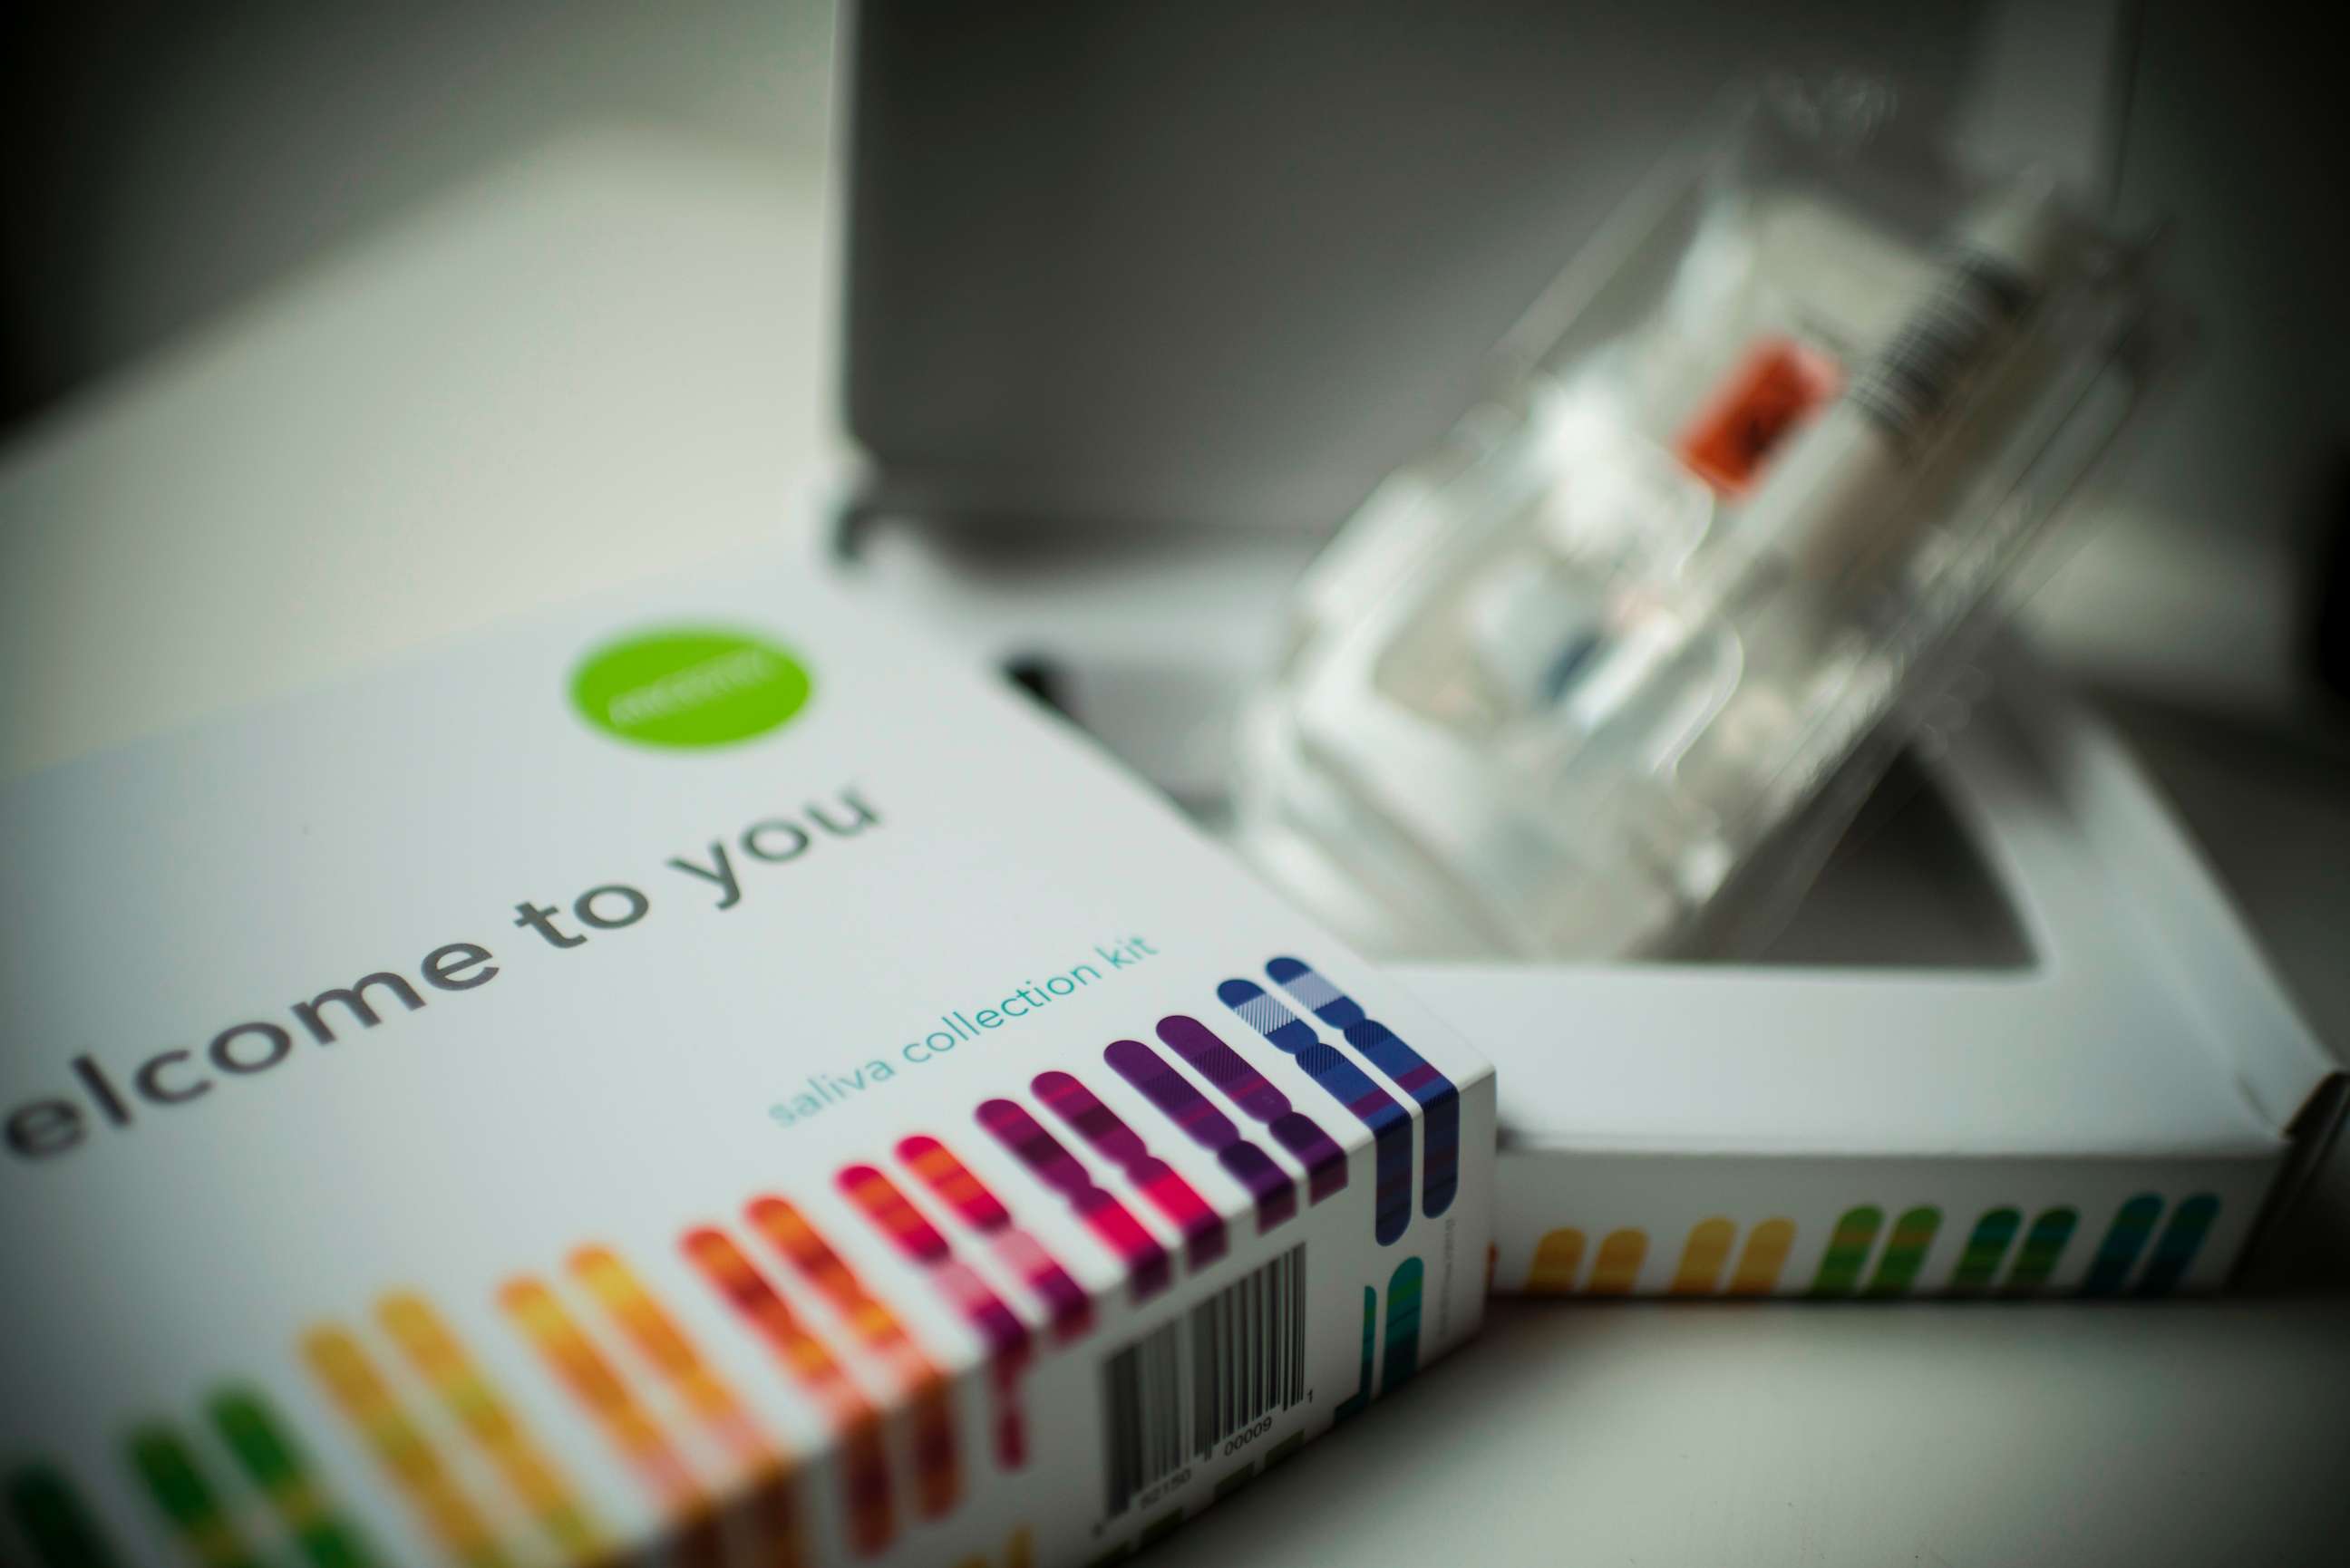 PHOTO: A saliva collection kit for DNA testing is displayed in Washington, D.C. on Dec. 19, 2018.